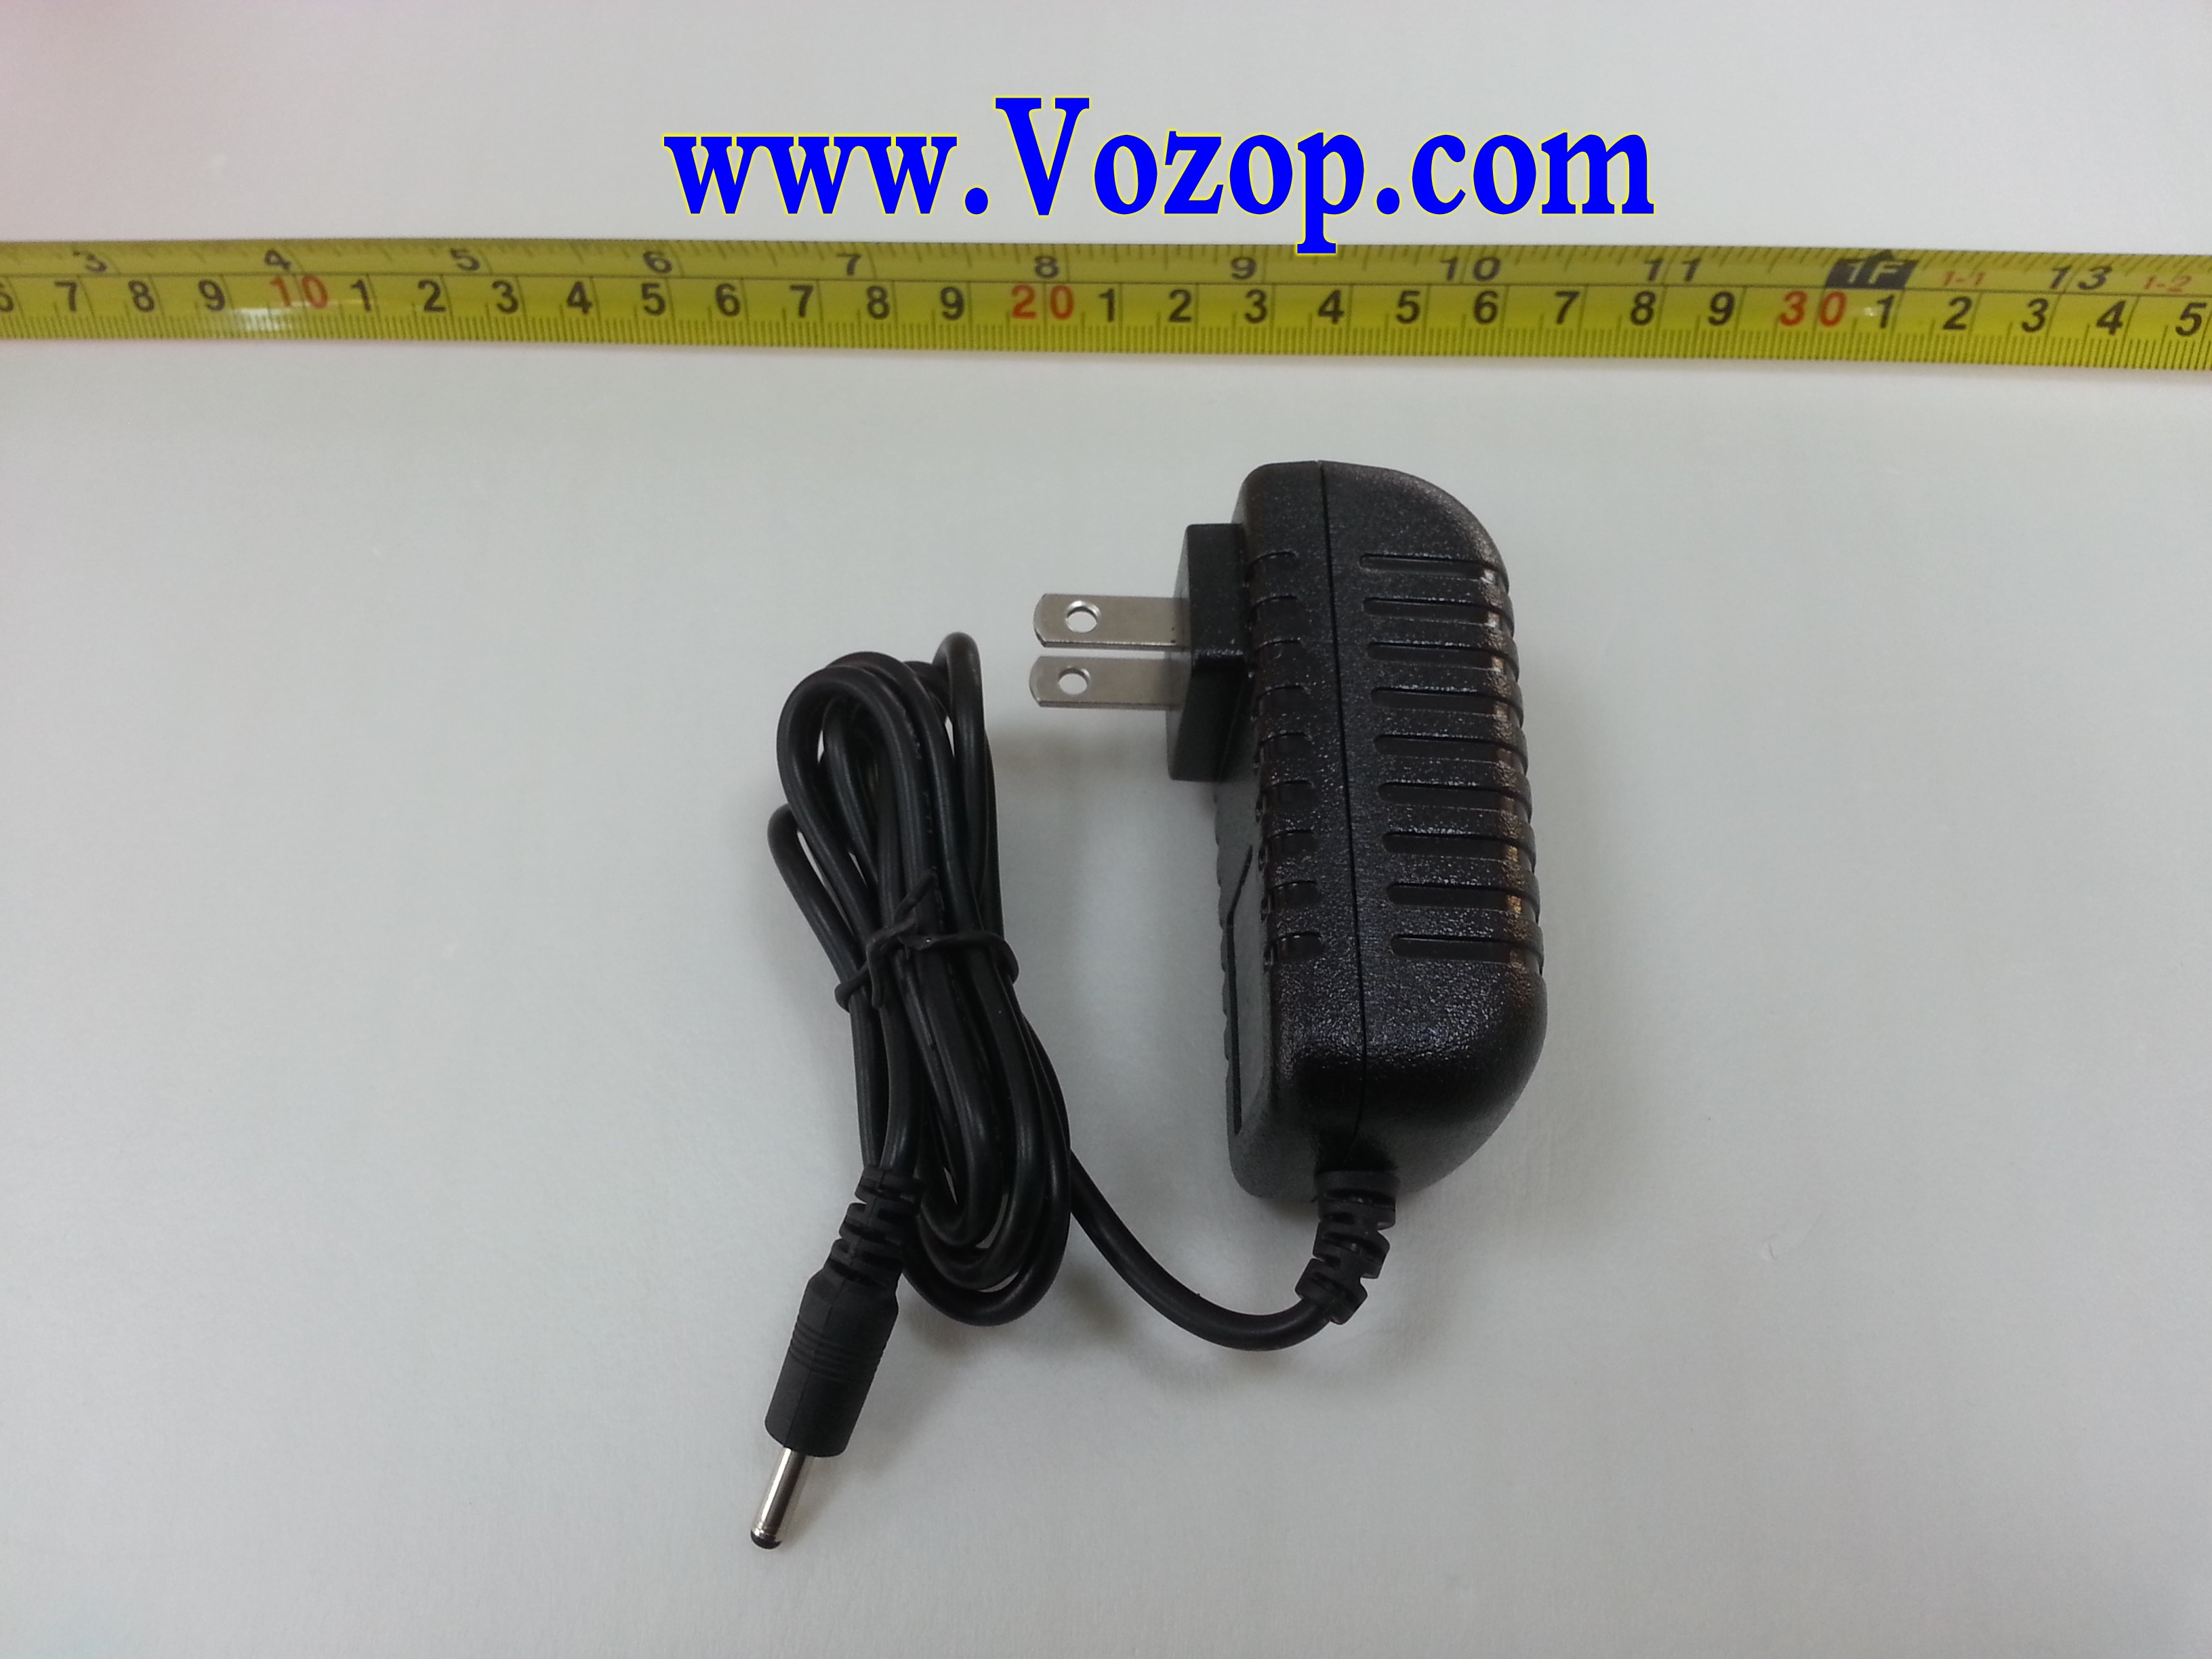 DC_5V_2A_Power_Adapter_AC_to_DC_Power_Supply_led_drivers